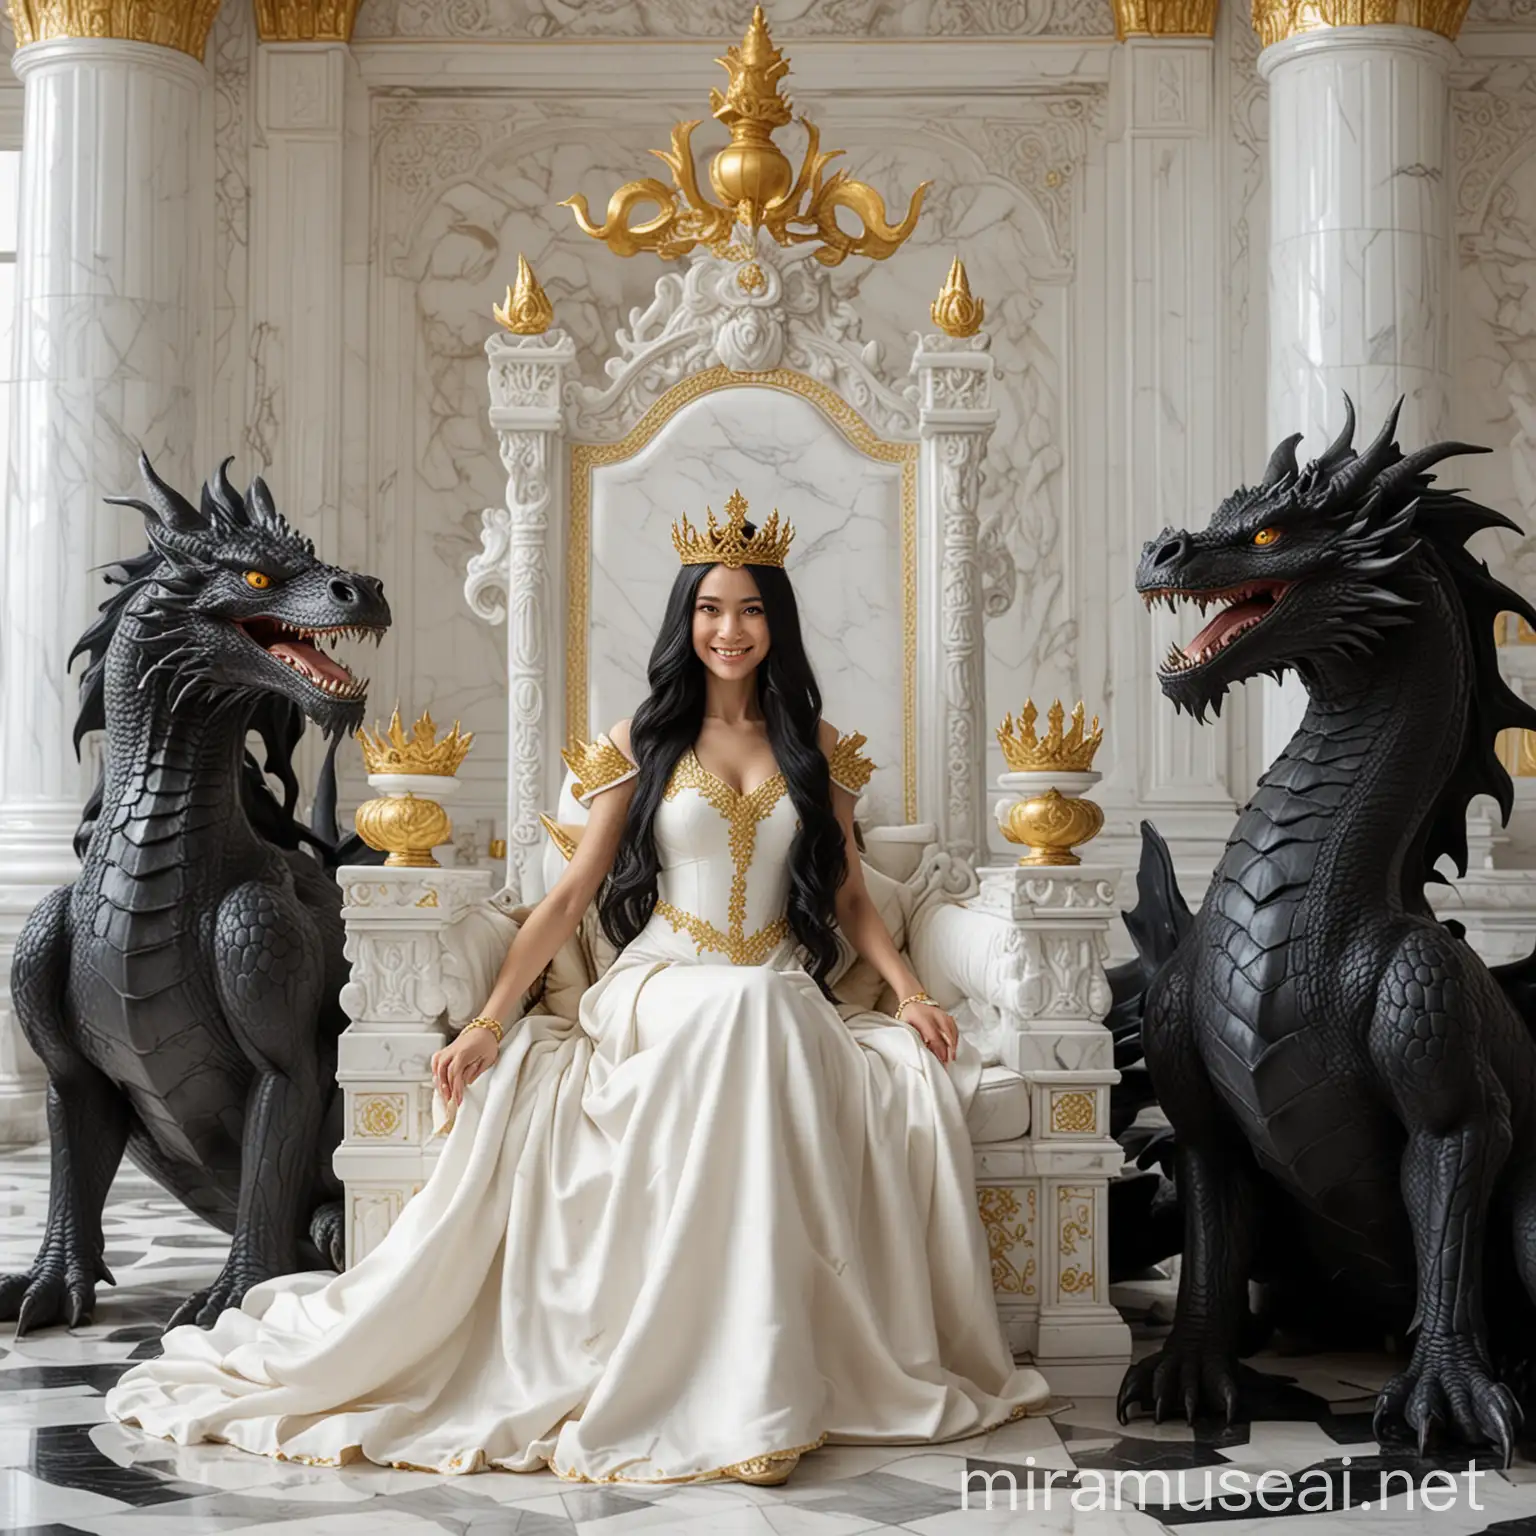 Regal Smiley Queen in Golden Dress Surrounded by Dragons in Marble Palace